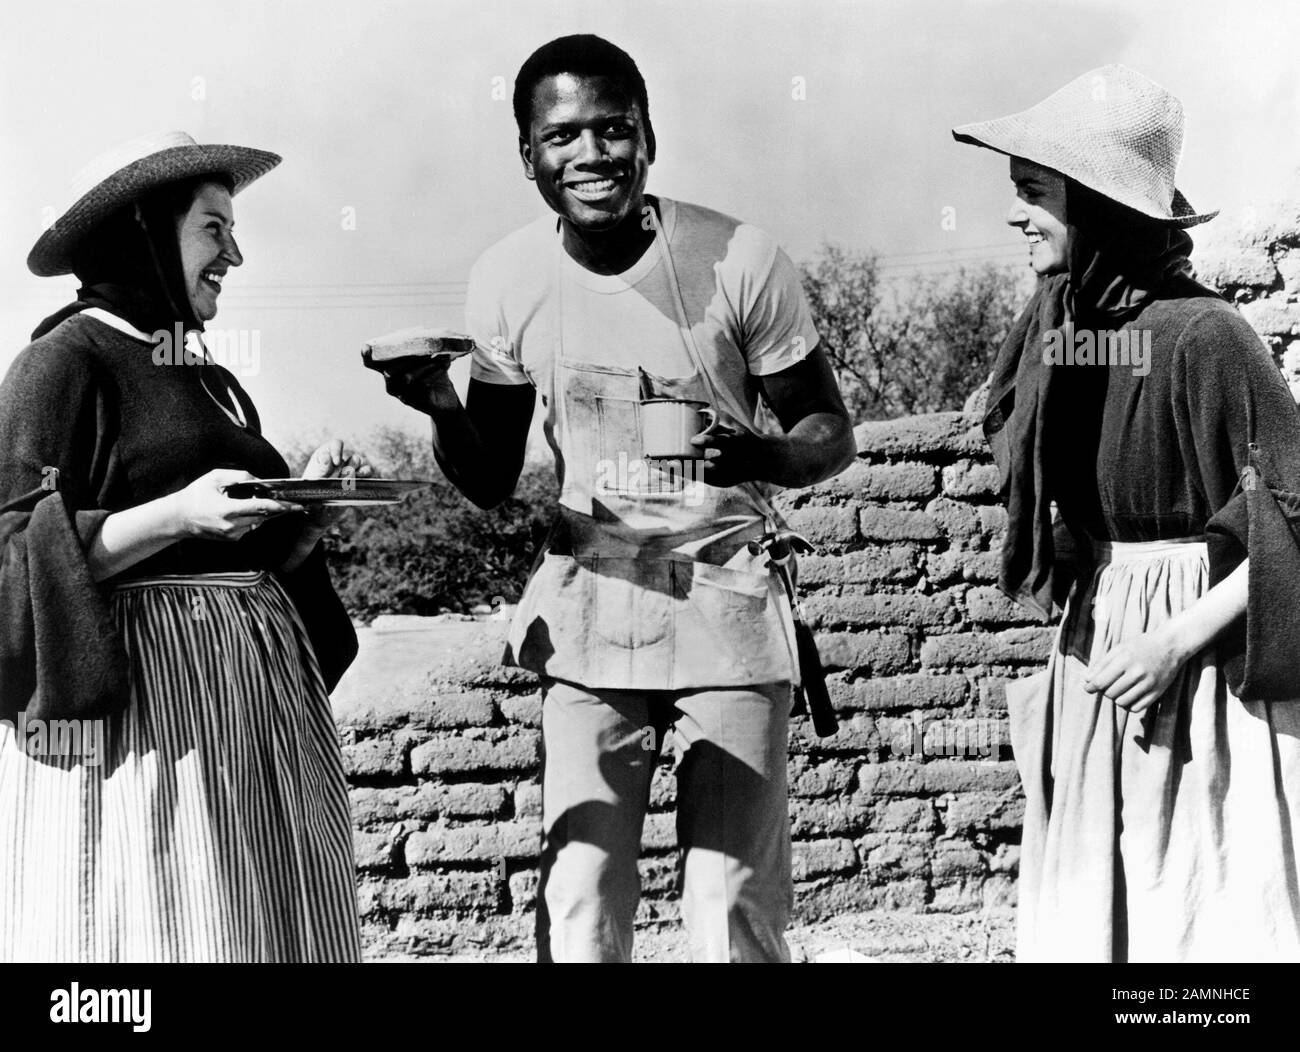 SKALA,POITIER, LILIES OF THE FIELD, 1963 Stock Photo